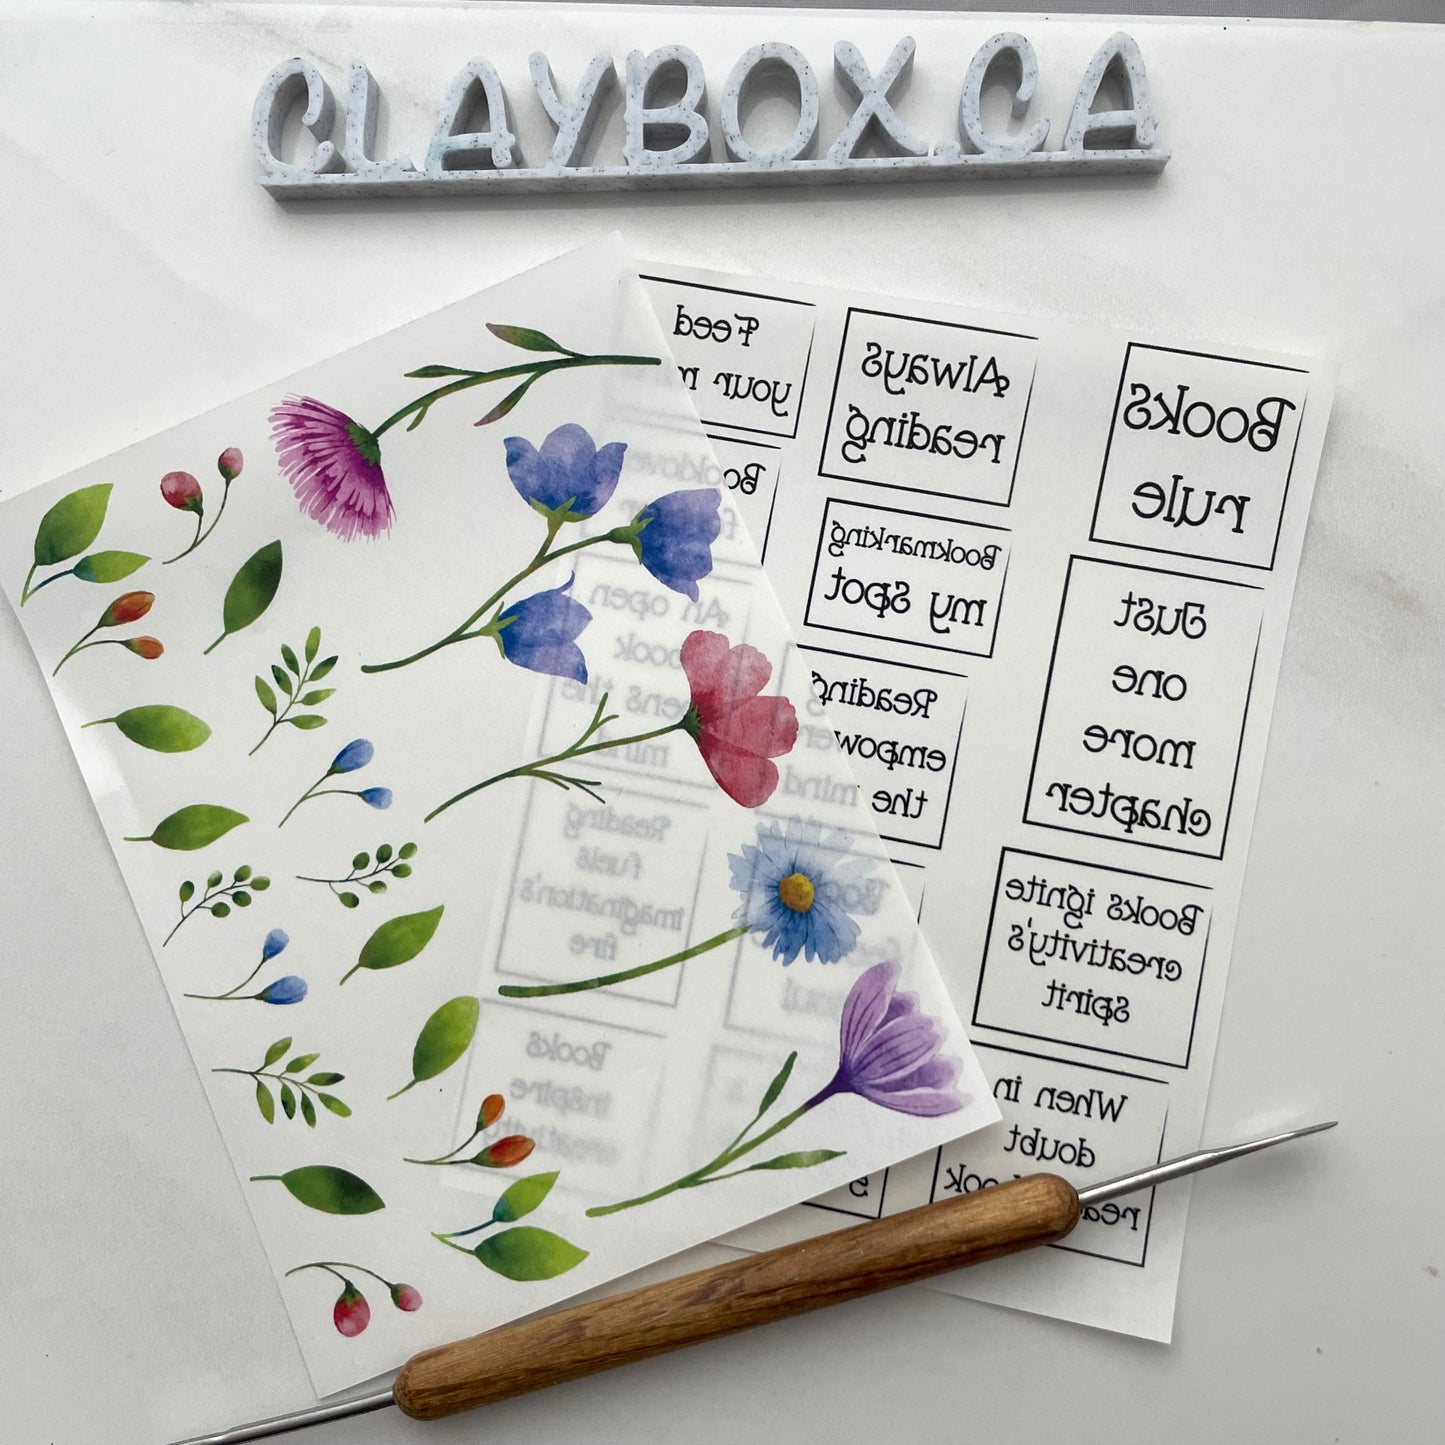 Image transfers - Flower, leaves and phrases for bookmarks